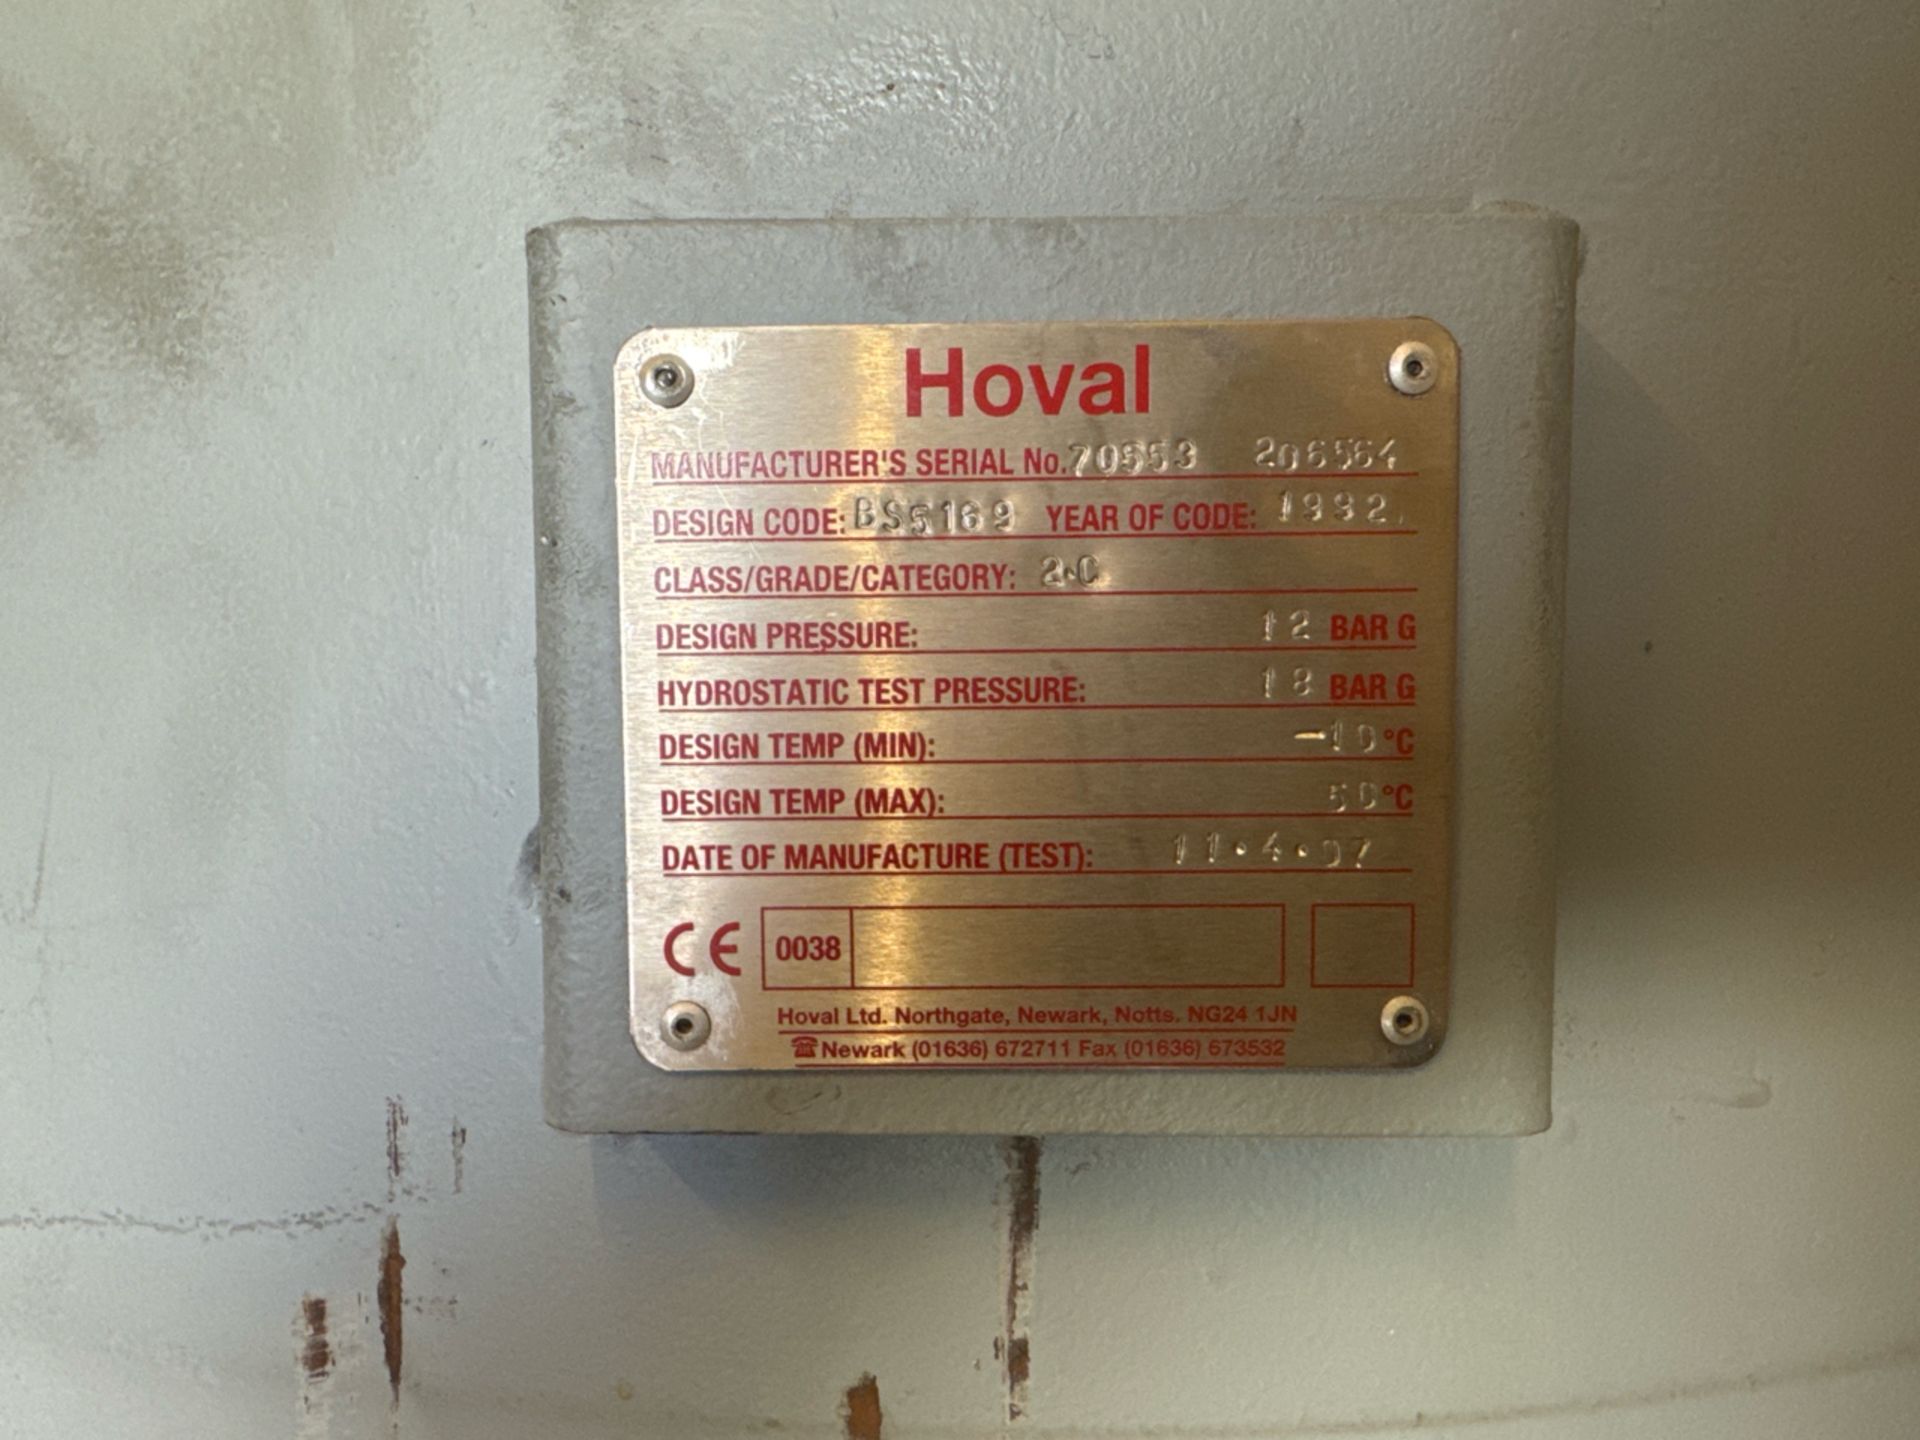 1992 Hoval Air Receiver Tank - Image 2 of 2